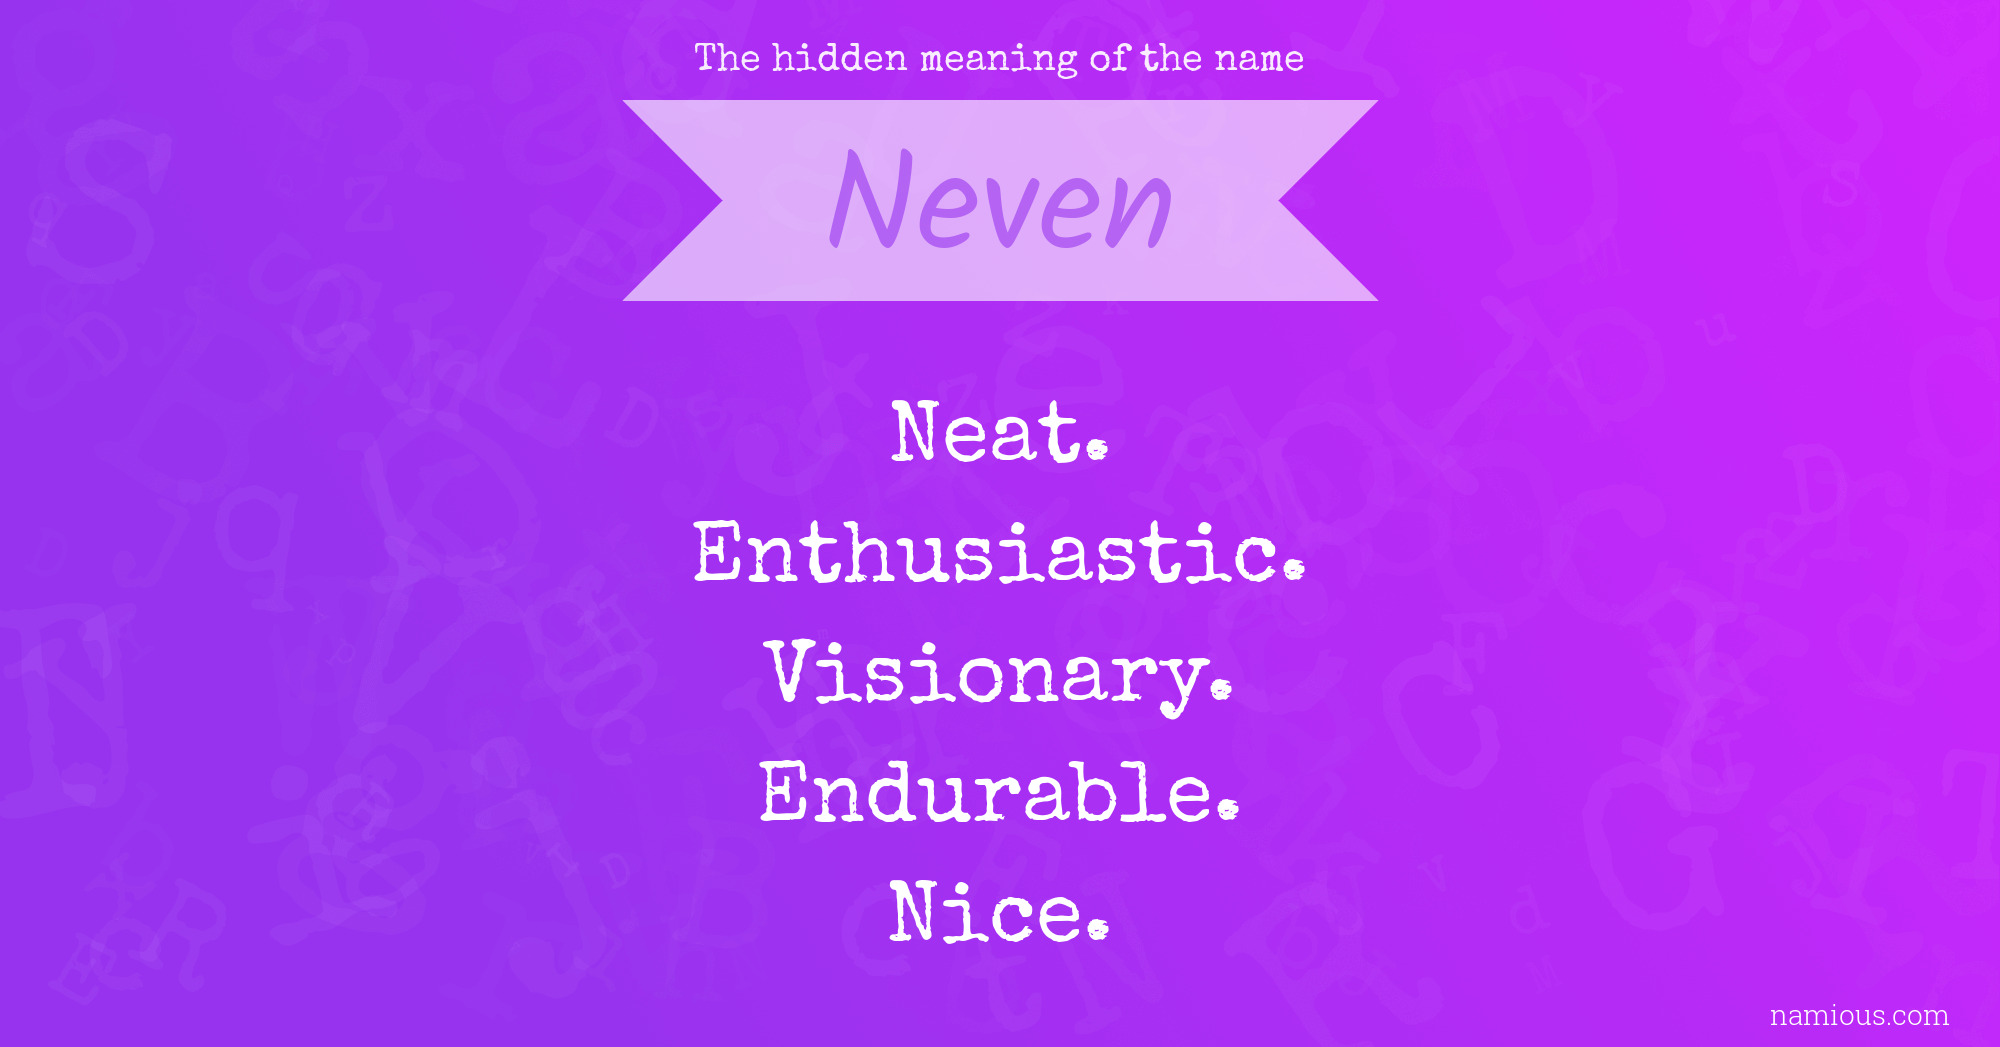 The hidden meaning of the name Neven